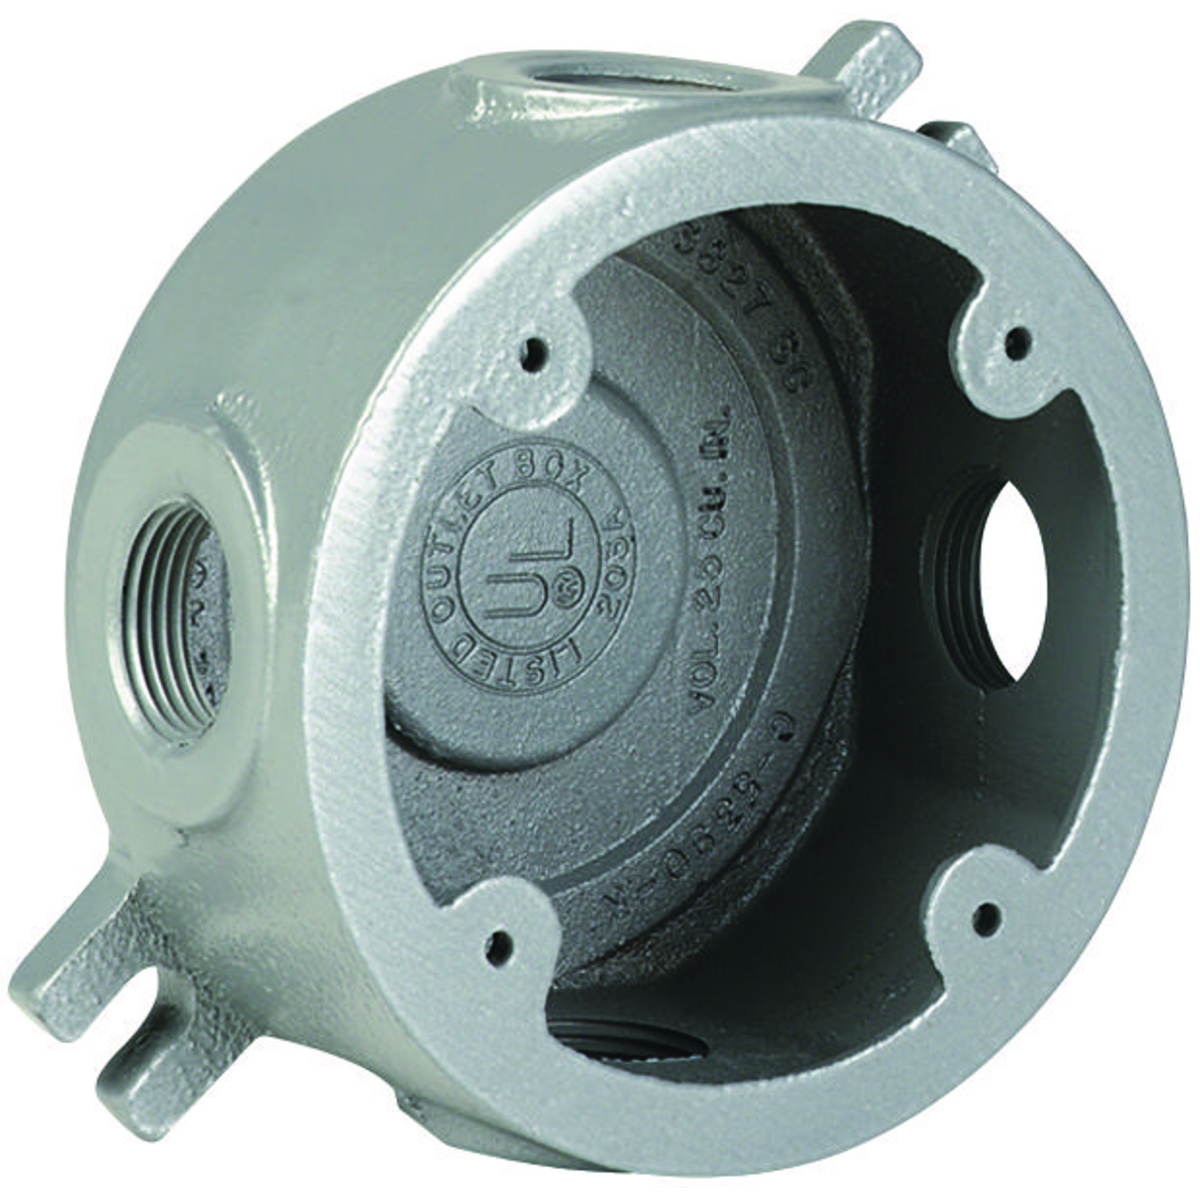 ROUND OUTLET 2-1/4" 3/4" HUB